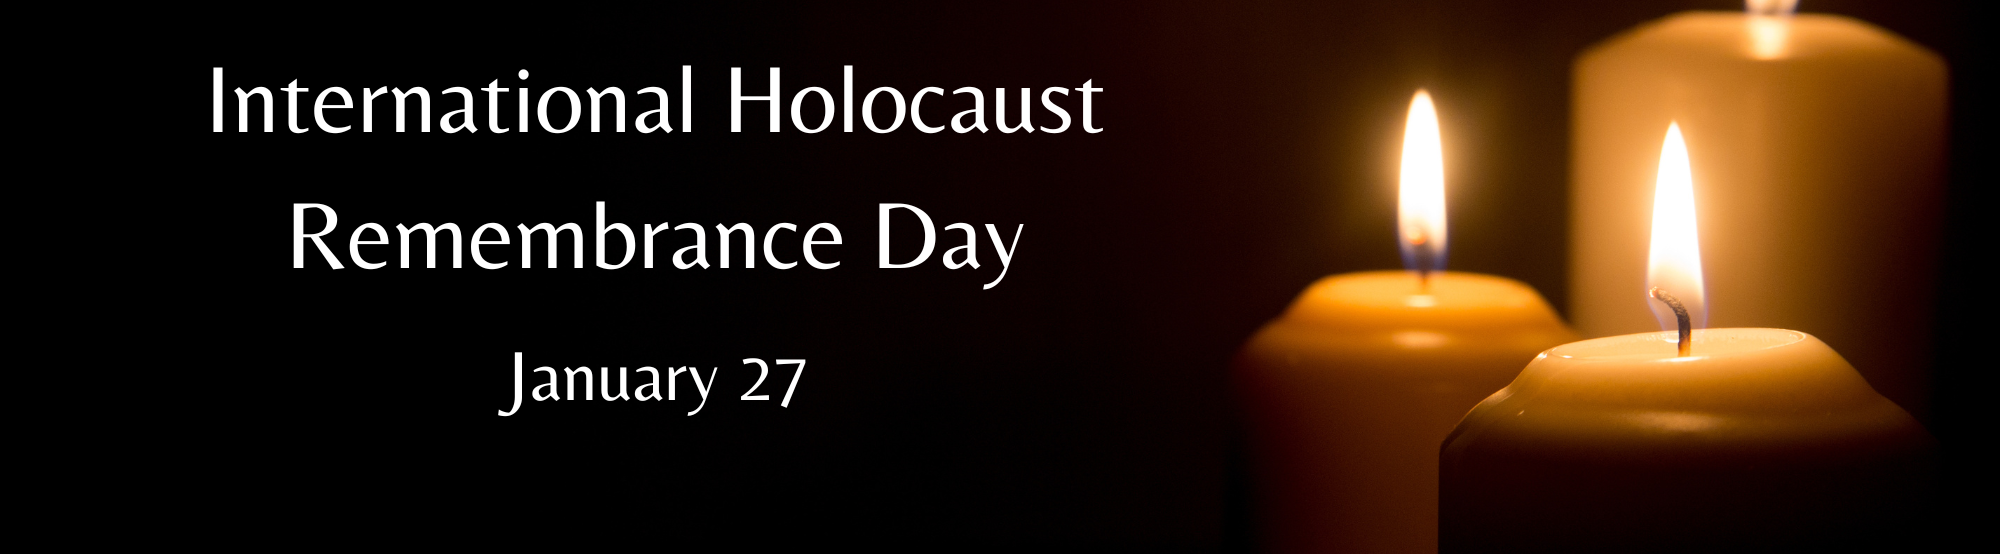 Decorative banner with the text International Holocaust Remembrance Day January 27